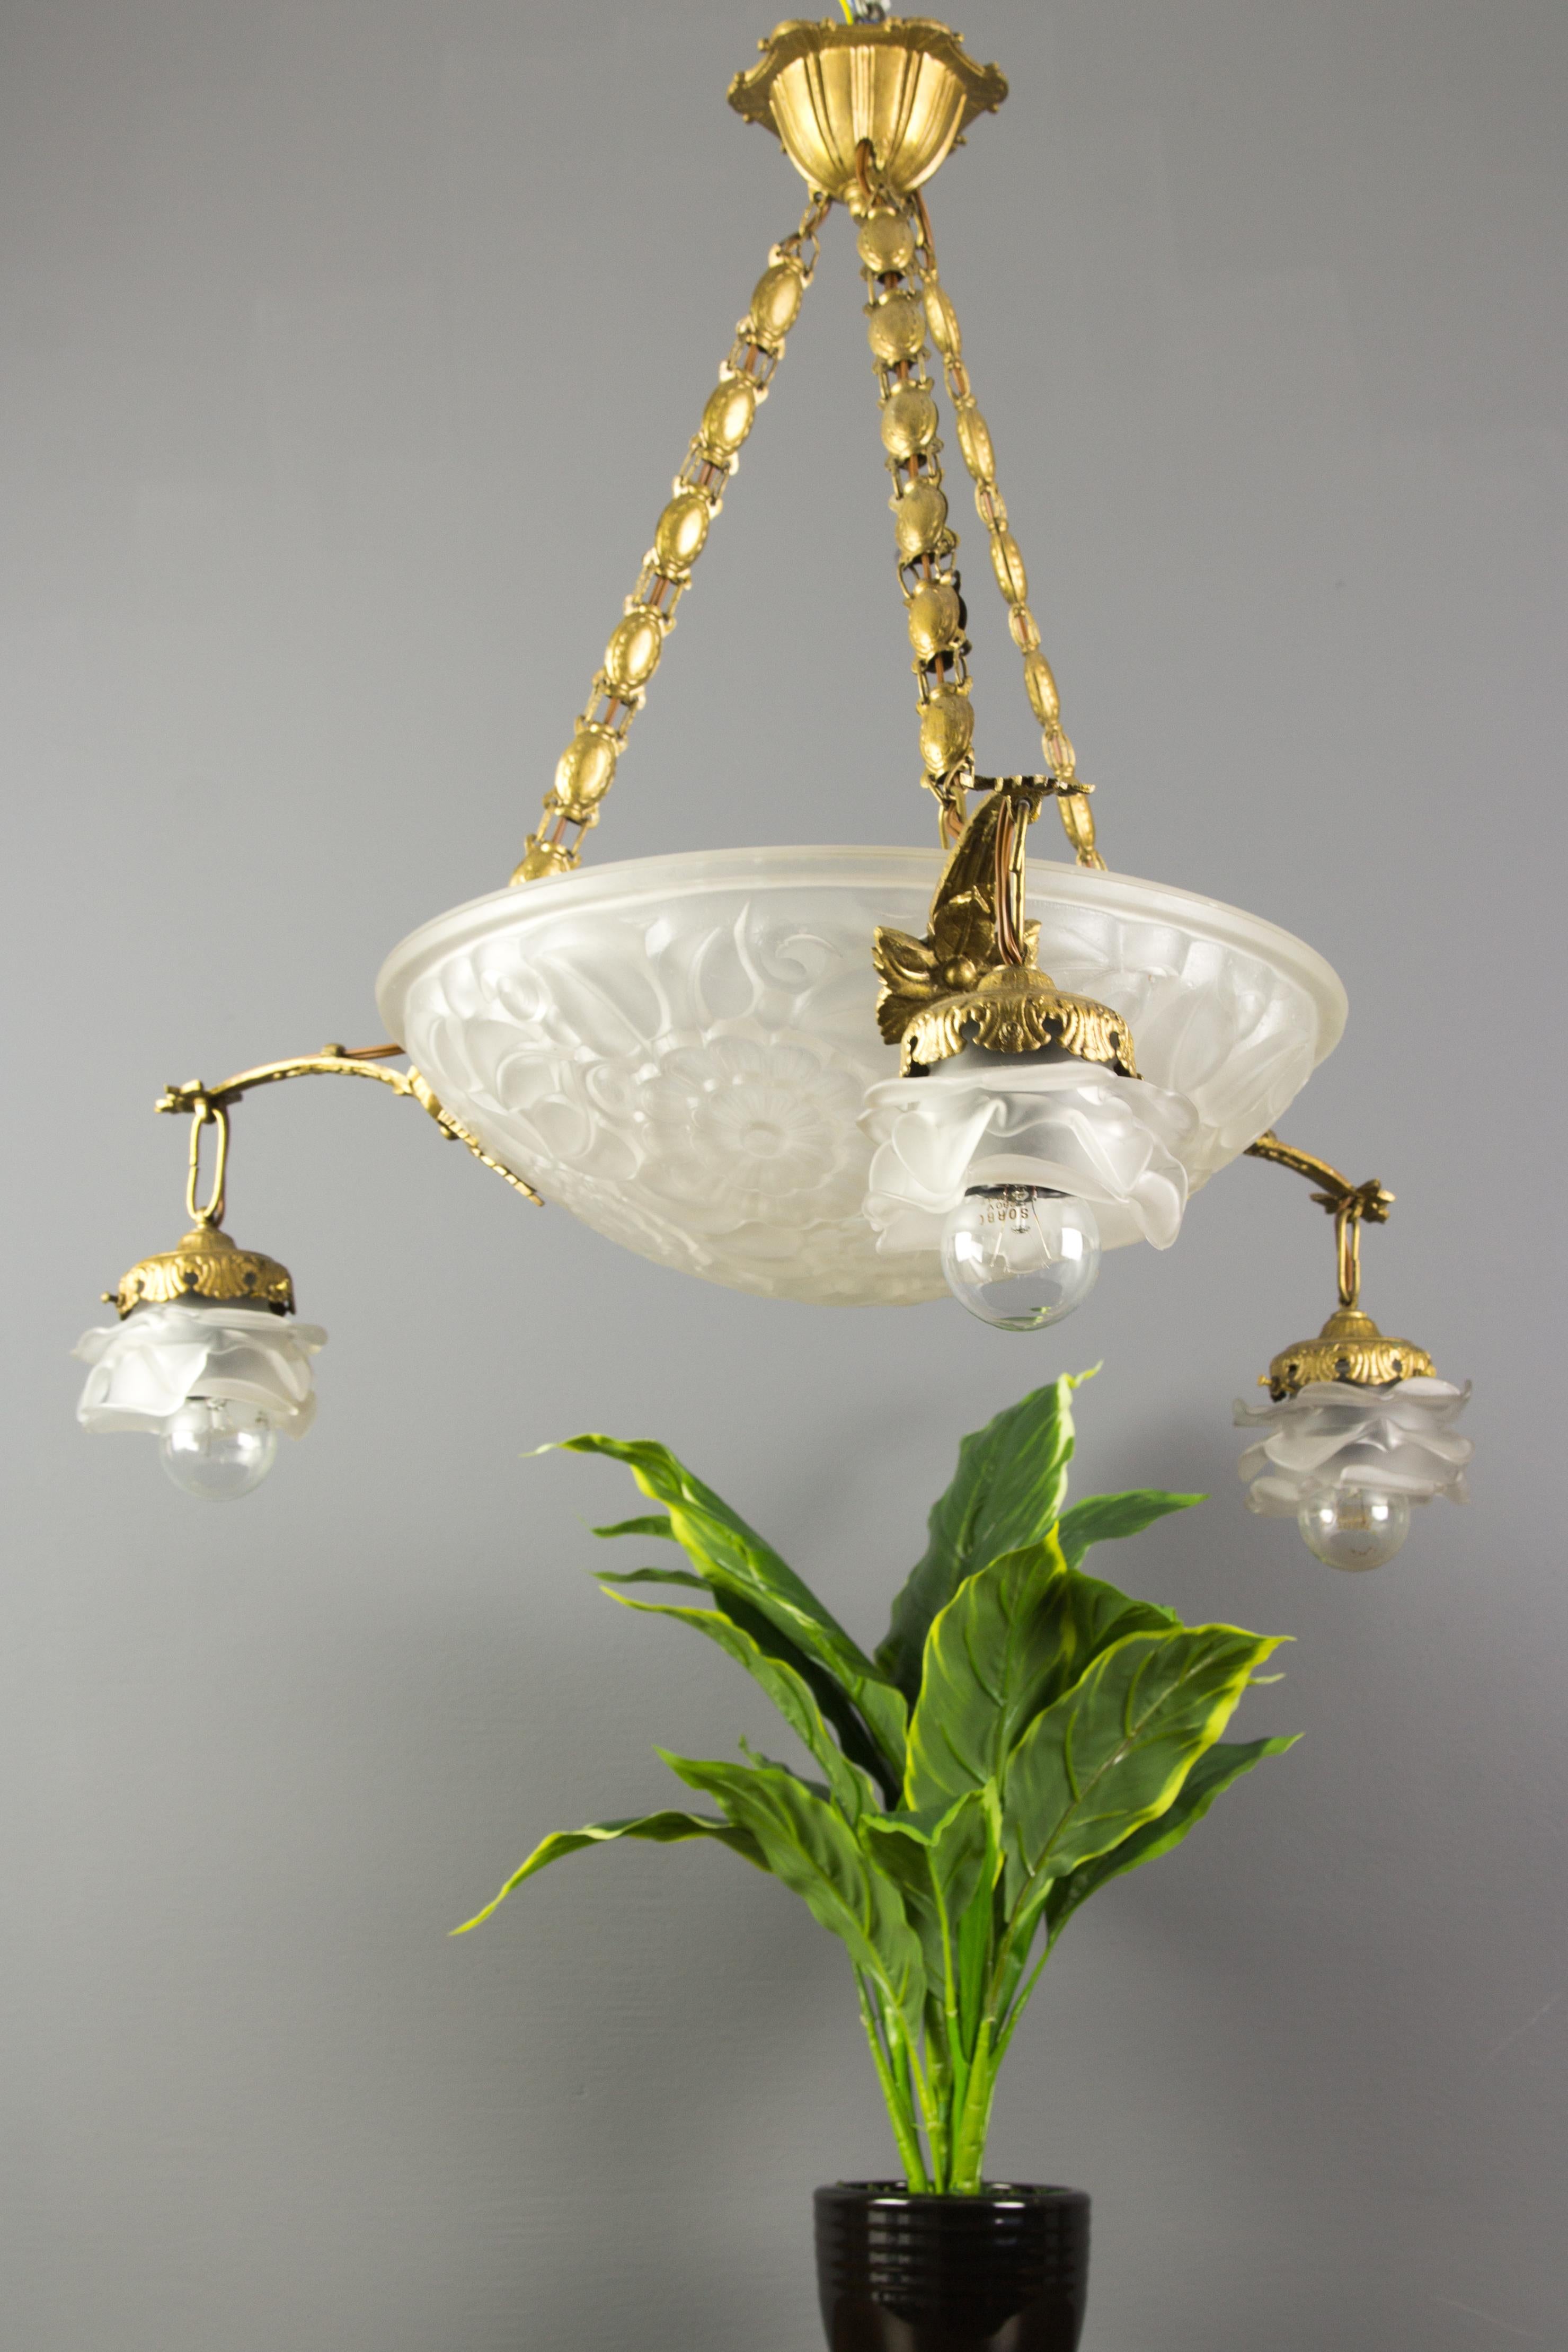 A beautiful French 1930s Art Deco chandelier with a central molded-pressed glass bowl, ornate with floral and deco motif and signed Primaflore, France. It is unknown which glass factory made this glass bowl, possibly Schneider or Degué. The three